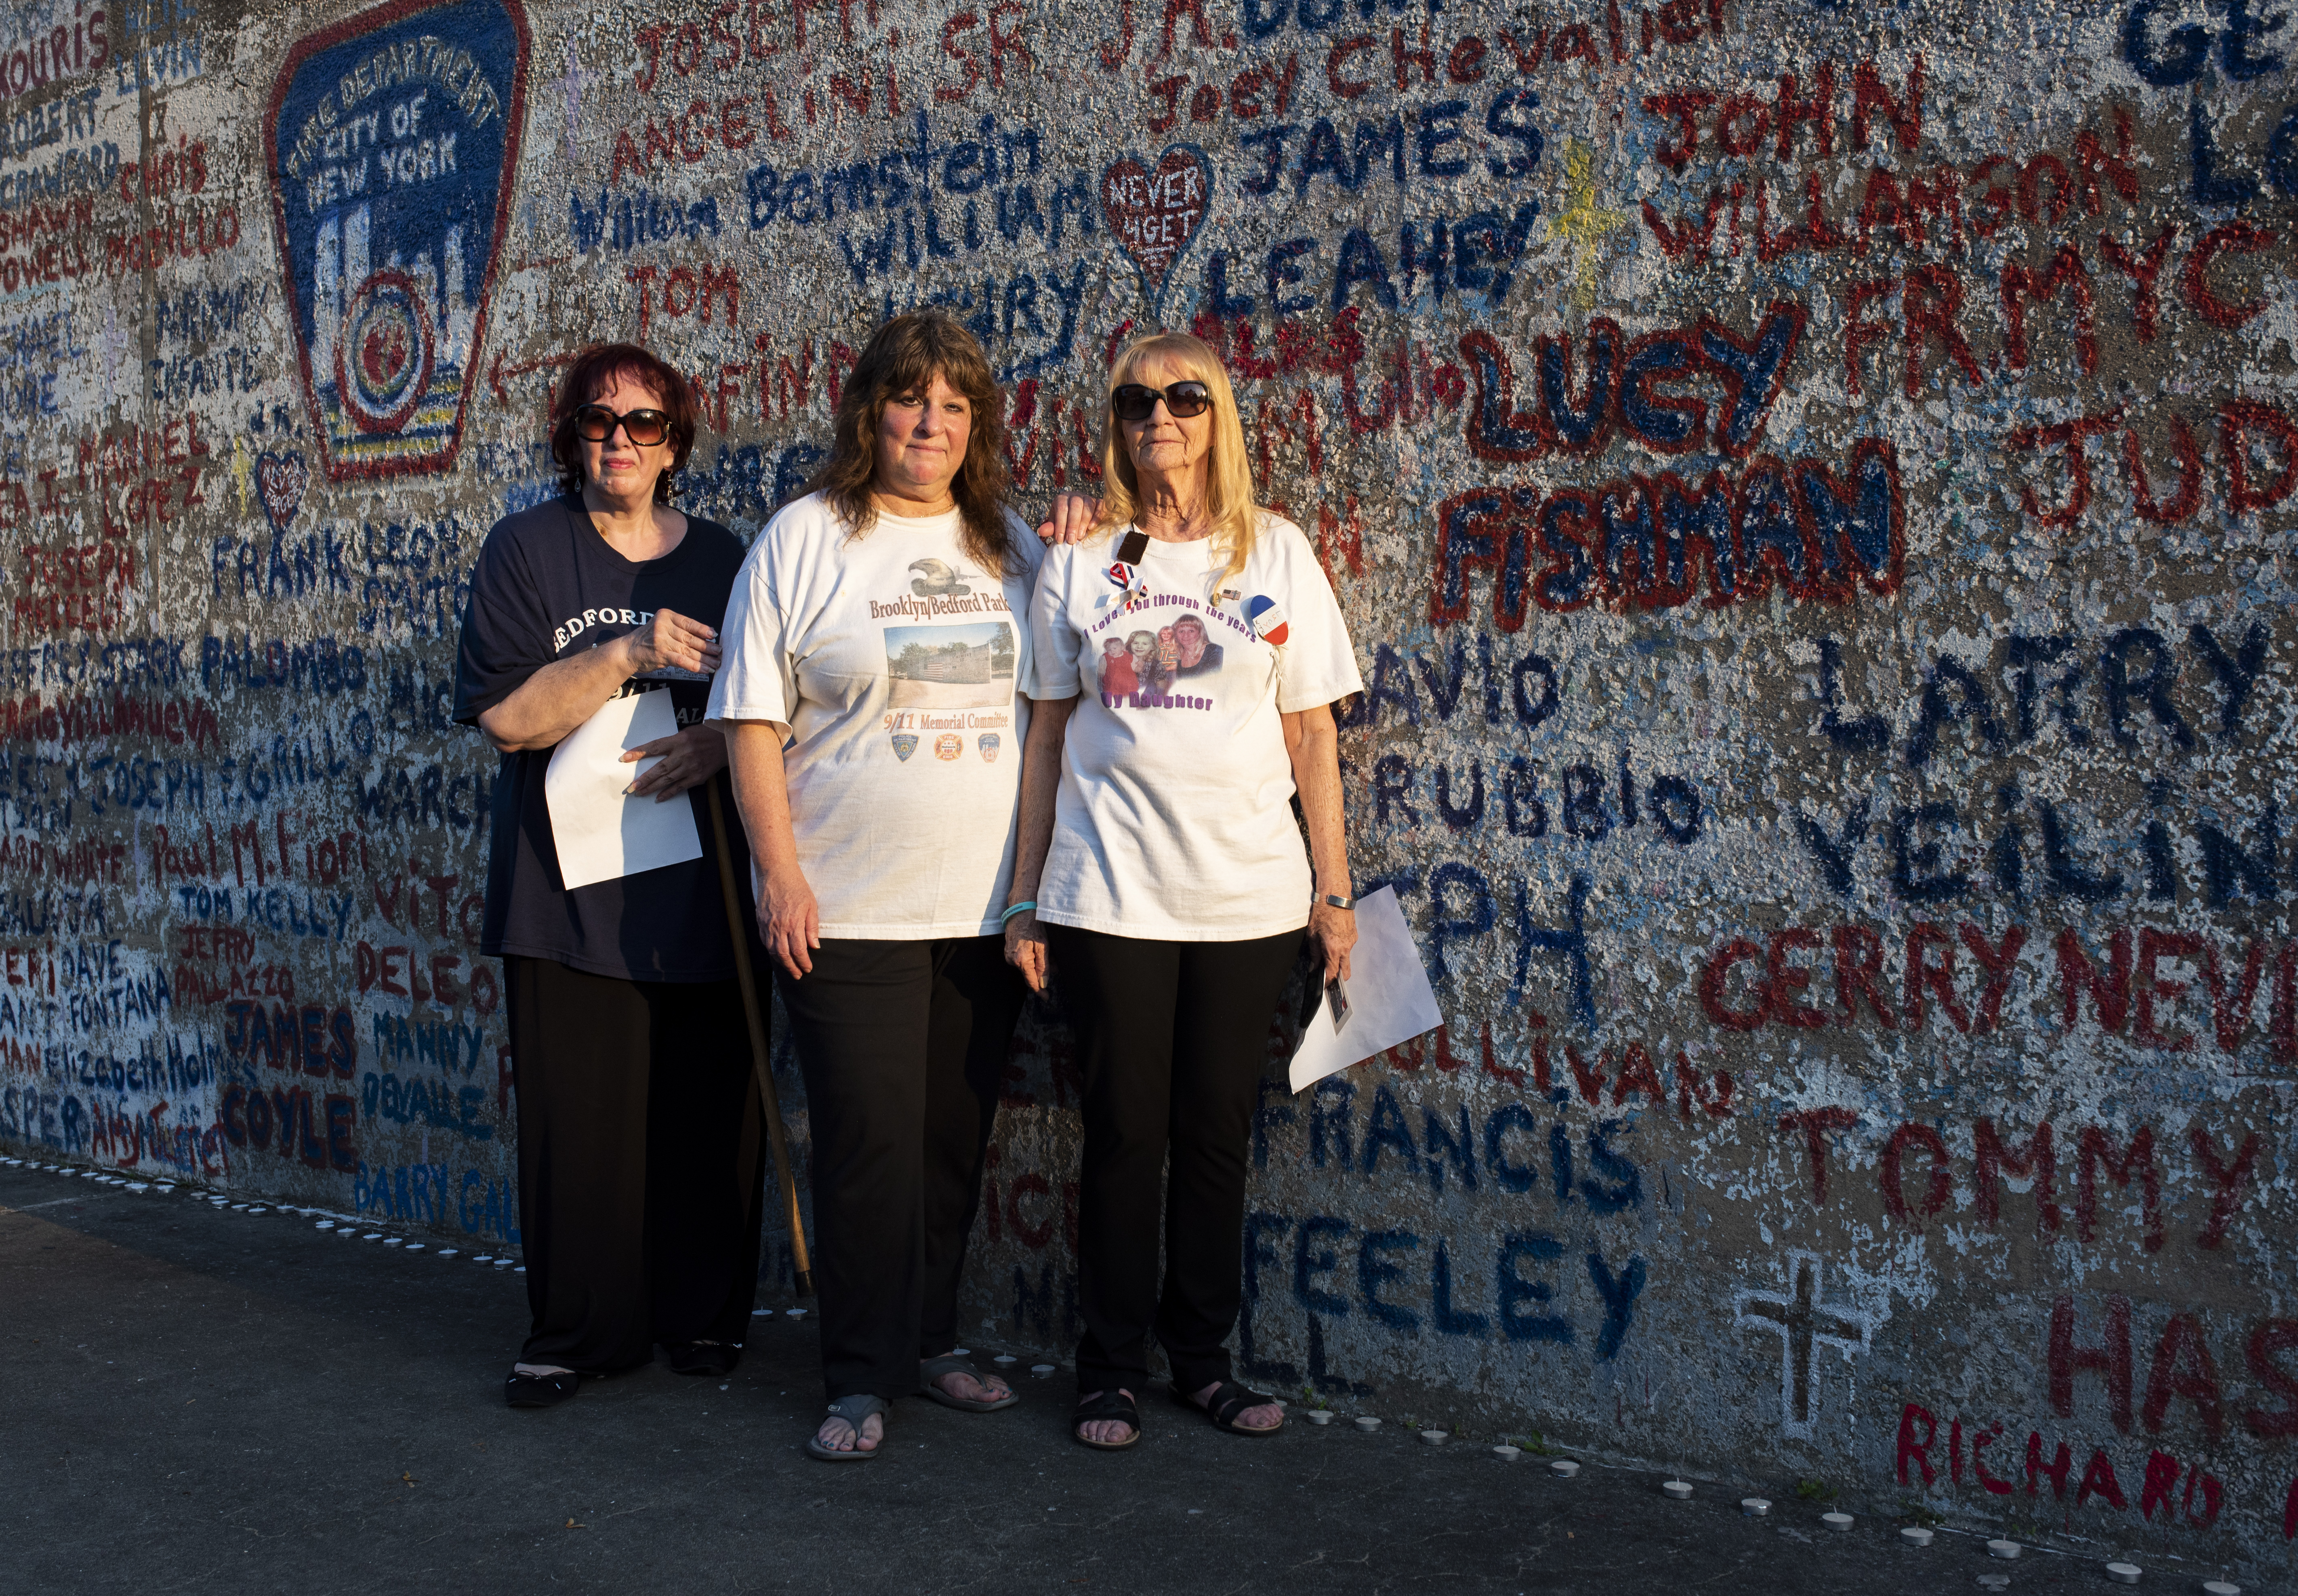 From left, 9/11 memorial organizers Angela Sabino, Tina Gray and Mary Bracken, who’s standing next to her daughter Lucy Fishman’s name painted on the wall. Eagle photo by Mark Davis